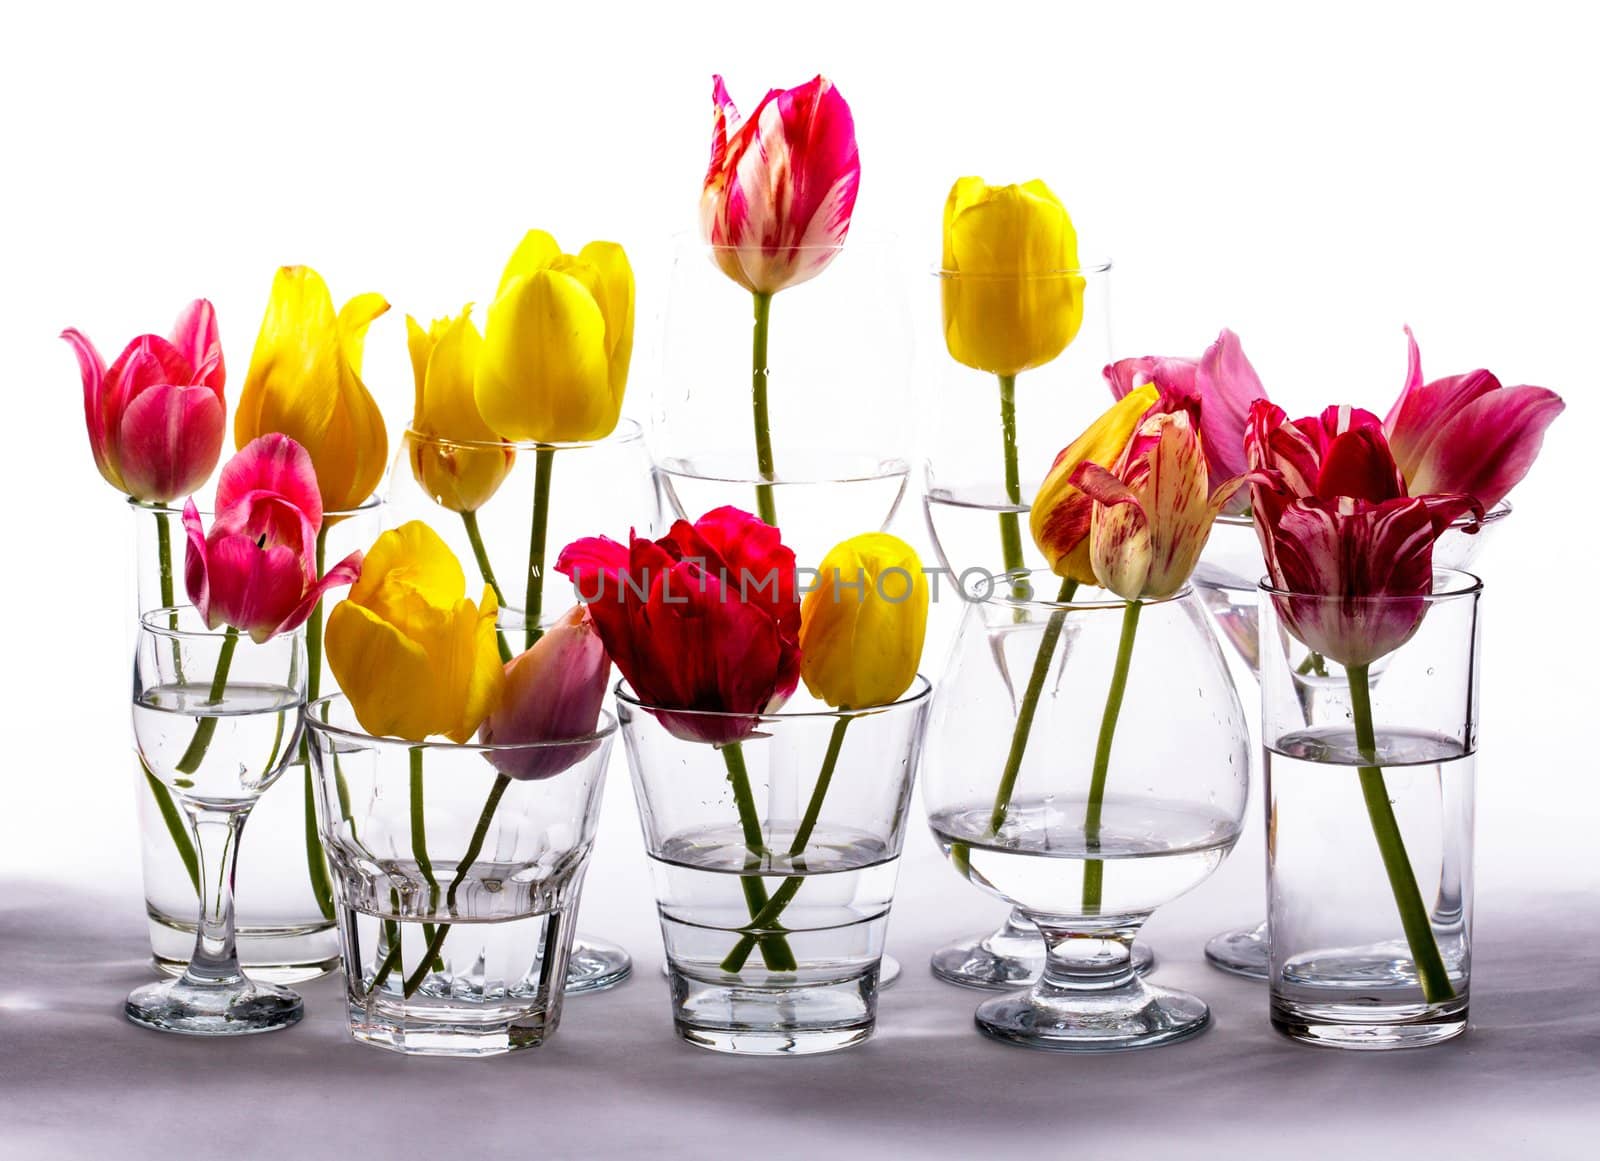 Tulips in glasses by oksix